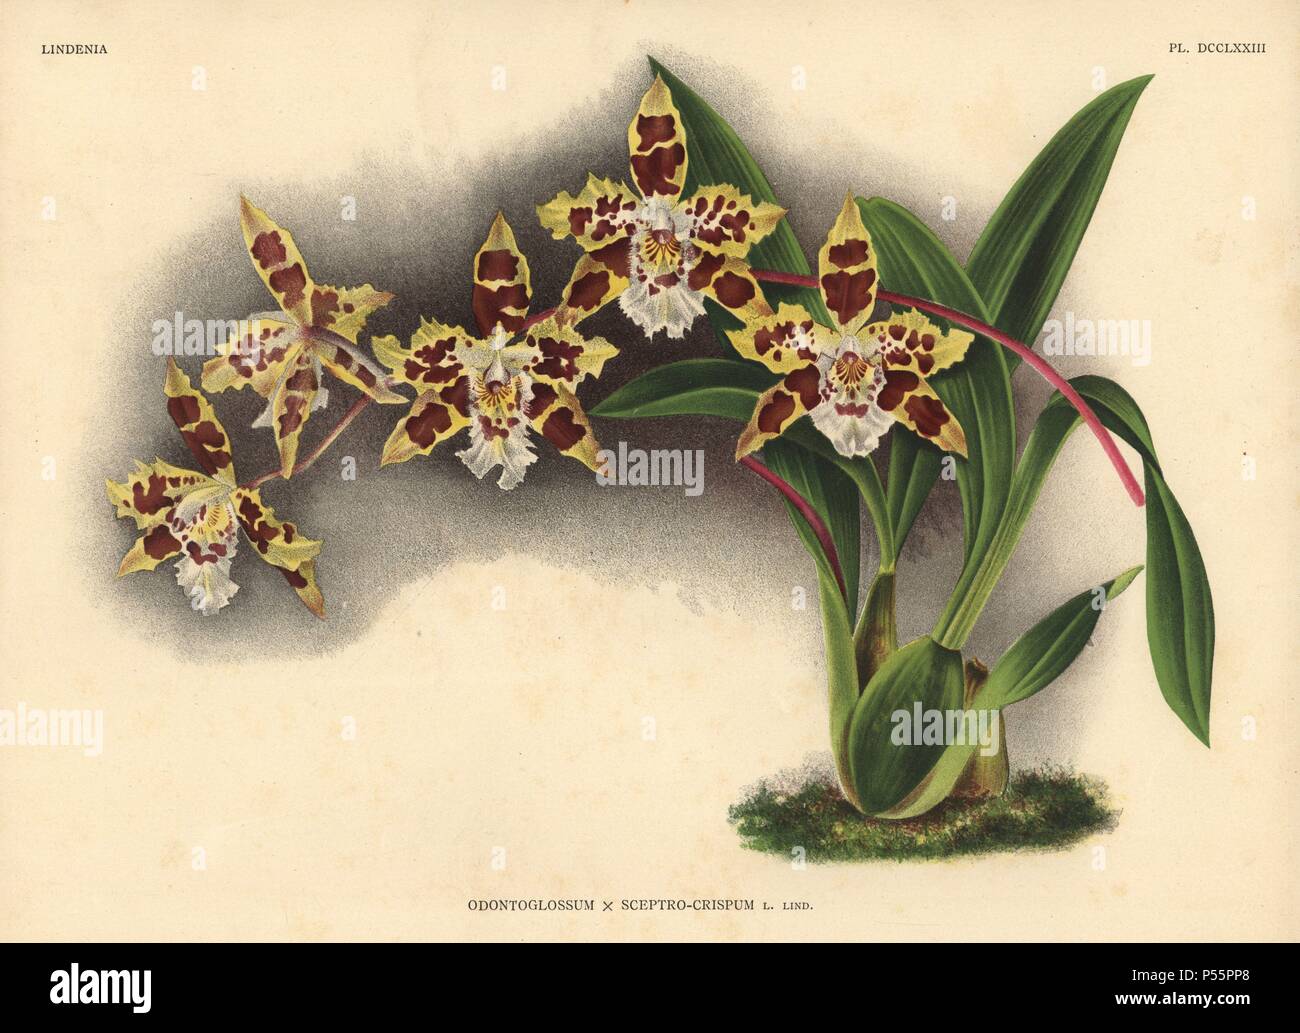 Odontoglossum x sceptro-crispum, L. Lind., hybrid orchid. Illustration drawn by C. de Bruyne and chromolithographed by P. de Pannemaeker et fils from Lucien Linden's "Lindenia, Iconographie des Orchidees," Brussels, 1902. Stock Photo